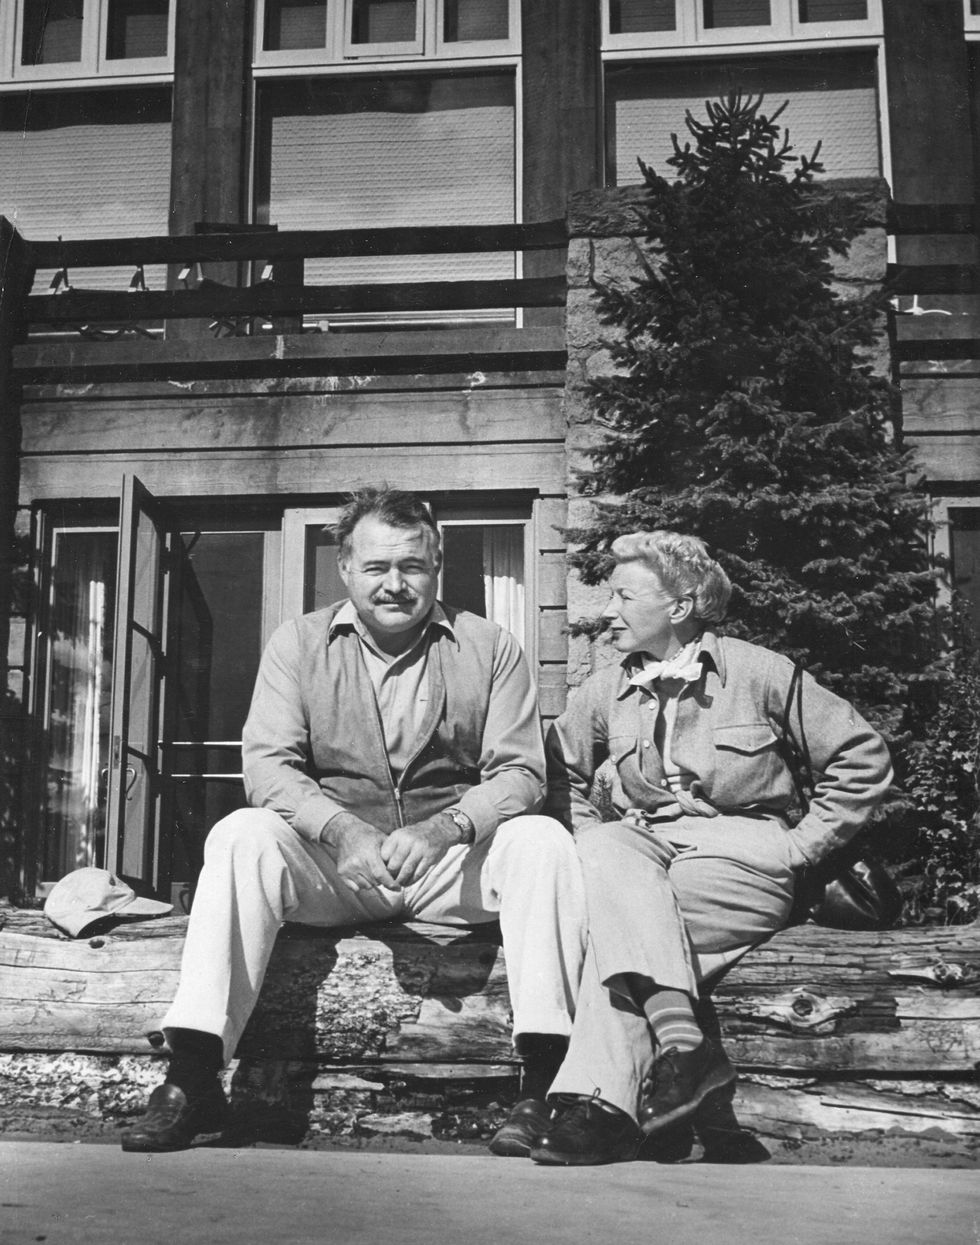 portrait of american author ernest hemingway 1899   1961 and his wife, journalist mary welsh hemingway 1908   1986, as they sit outside on a log fence while on vacation, 1946 photo by photoquestgetty images